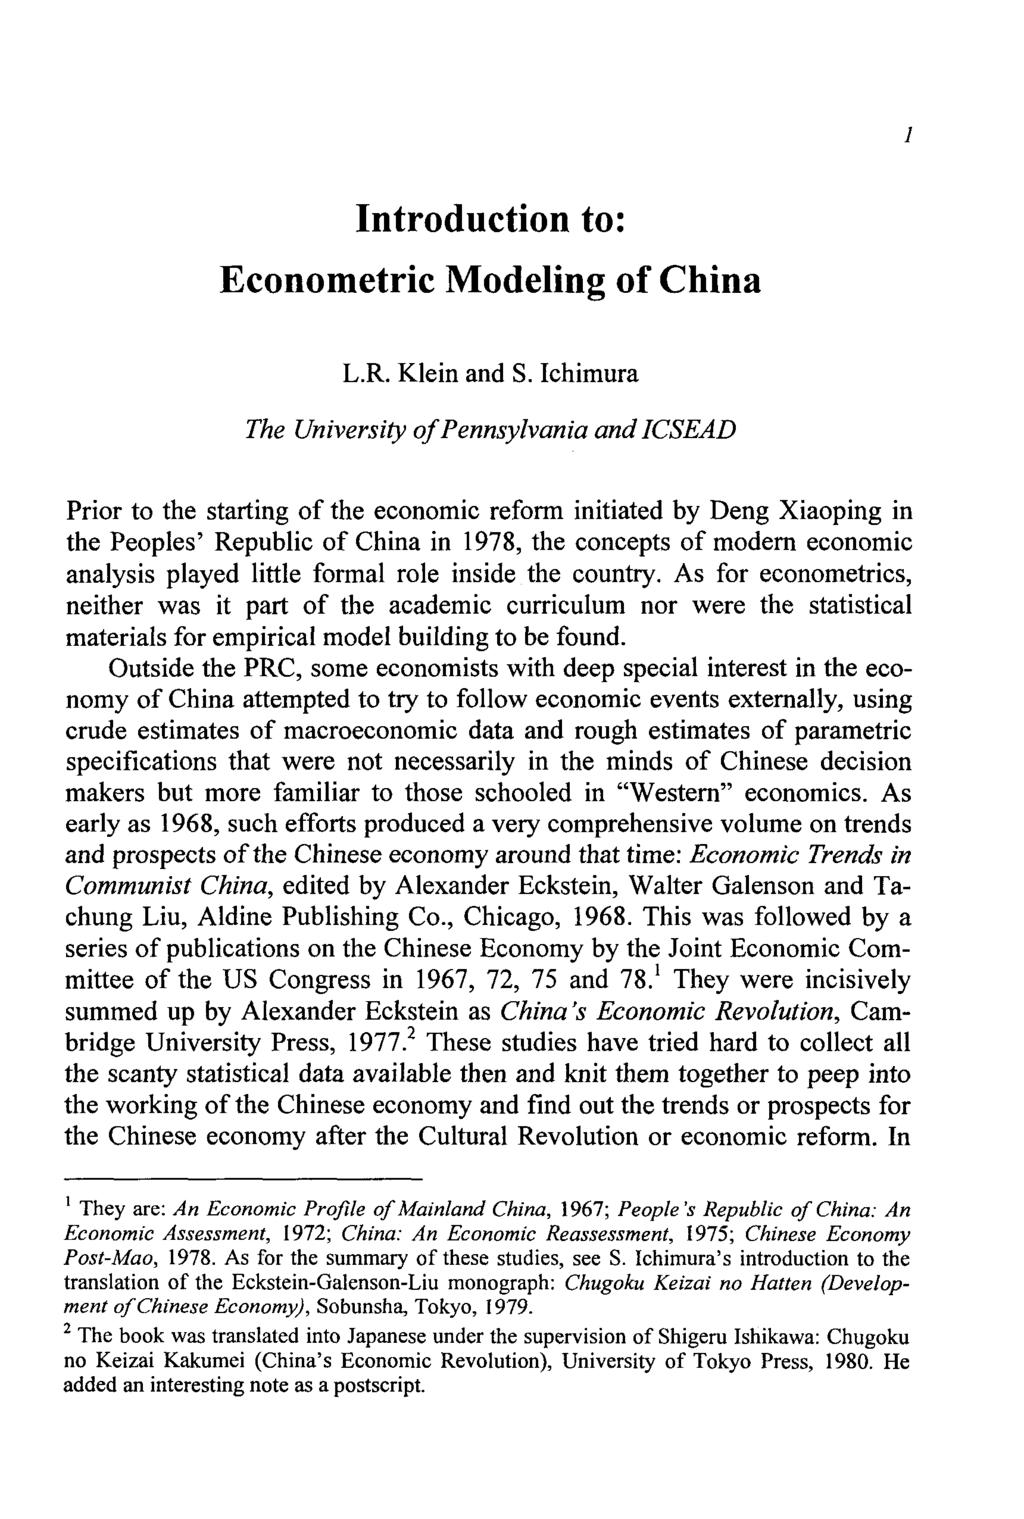 1 Introduction to: Econometric Modeling of China L.R. Klein and S.